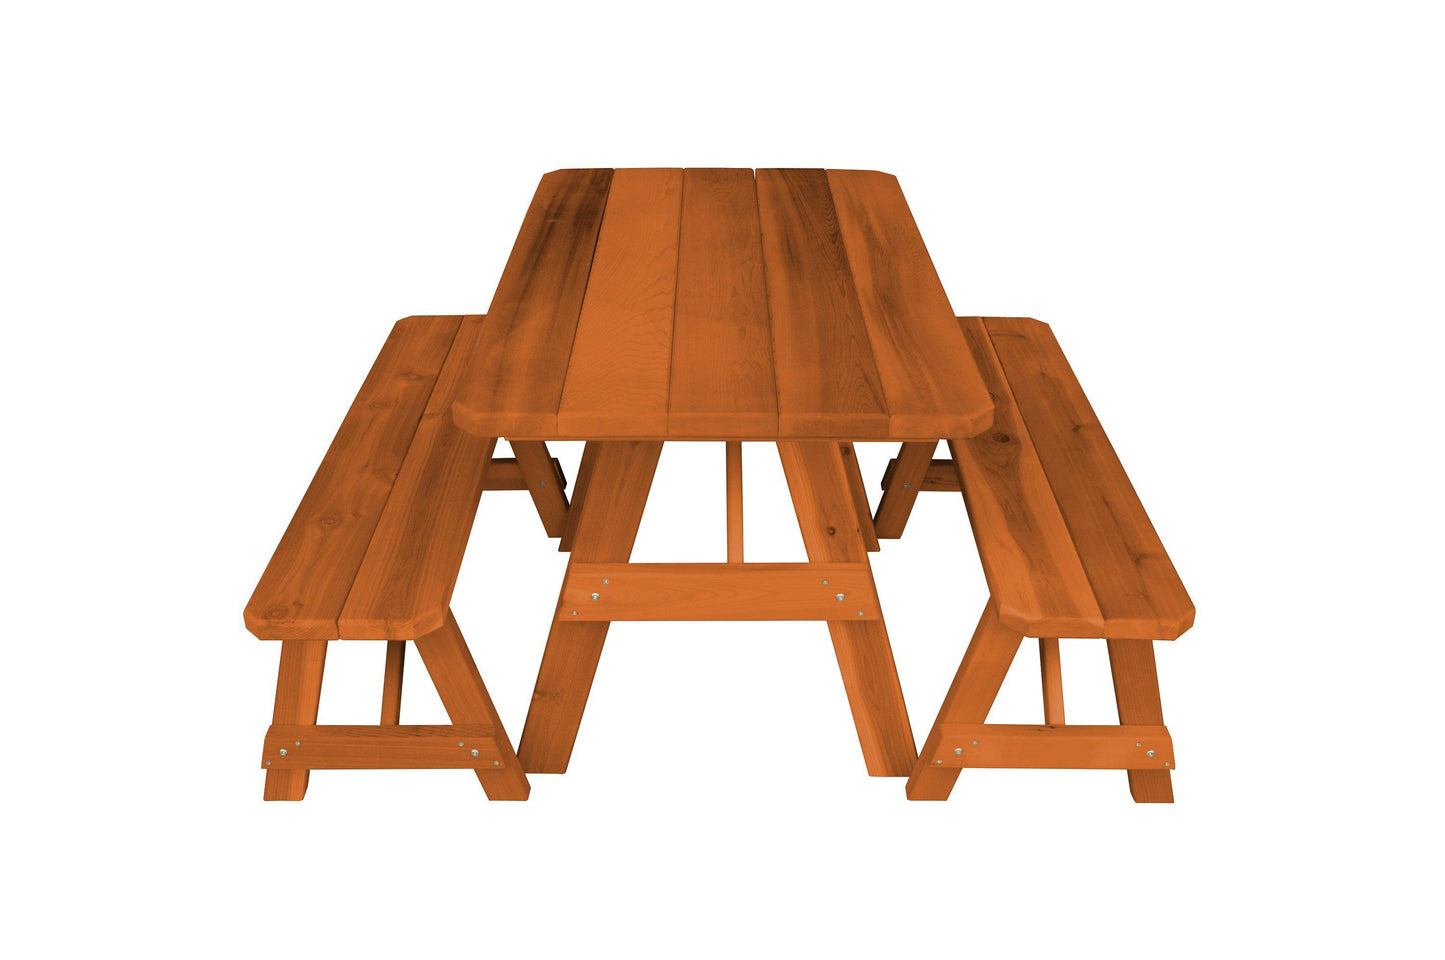 A&L FURNITURE CO.Western Red Cedar 5' Traditional Table w/2 Benches - Specify for FREE 2" Umbrella Hole - LEAD TIME TO SHIP 2 WEEKS